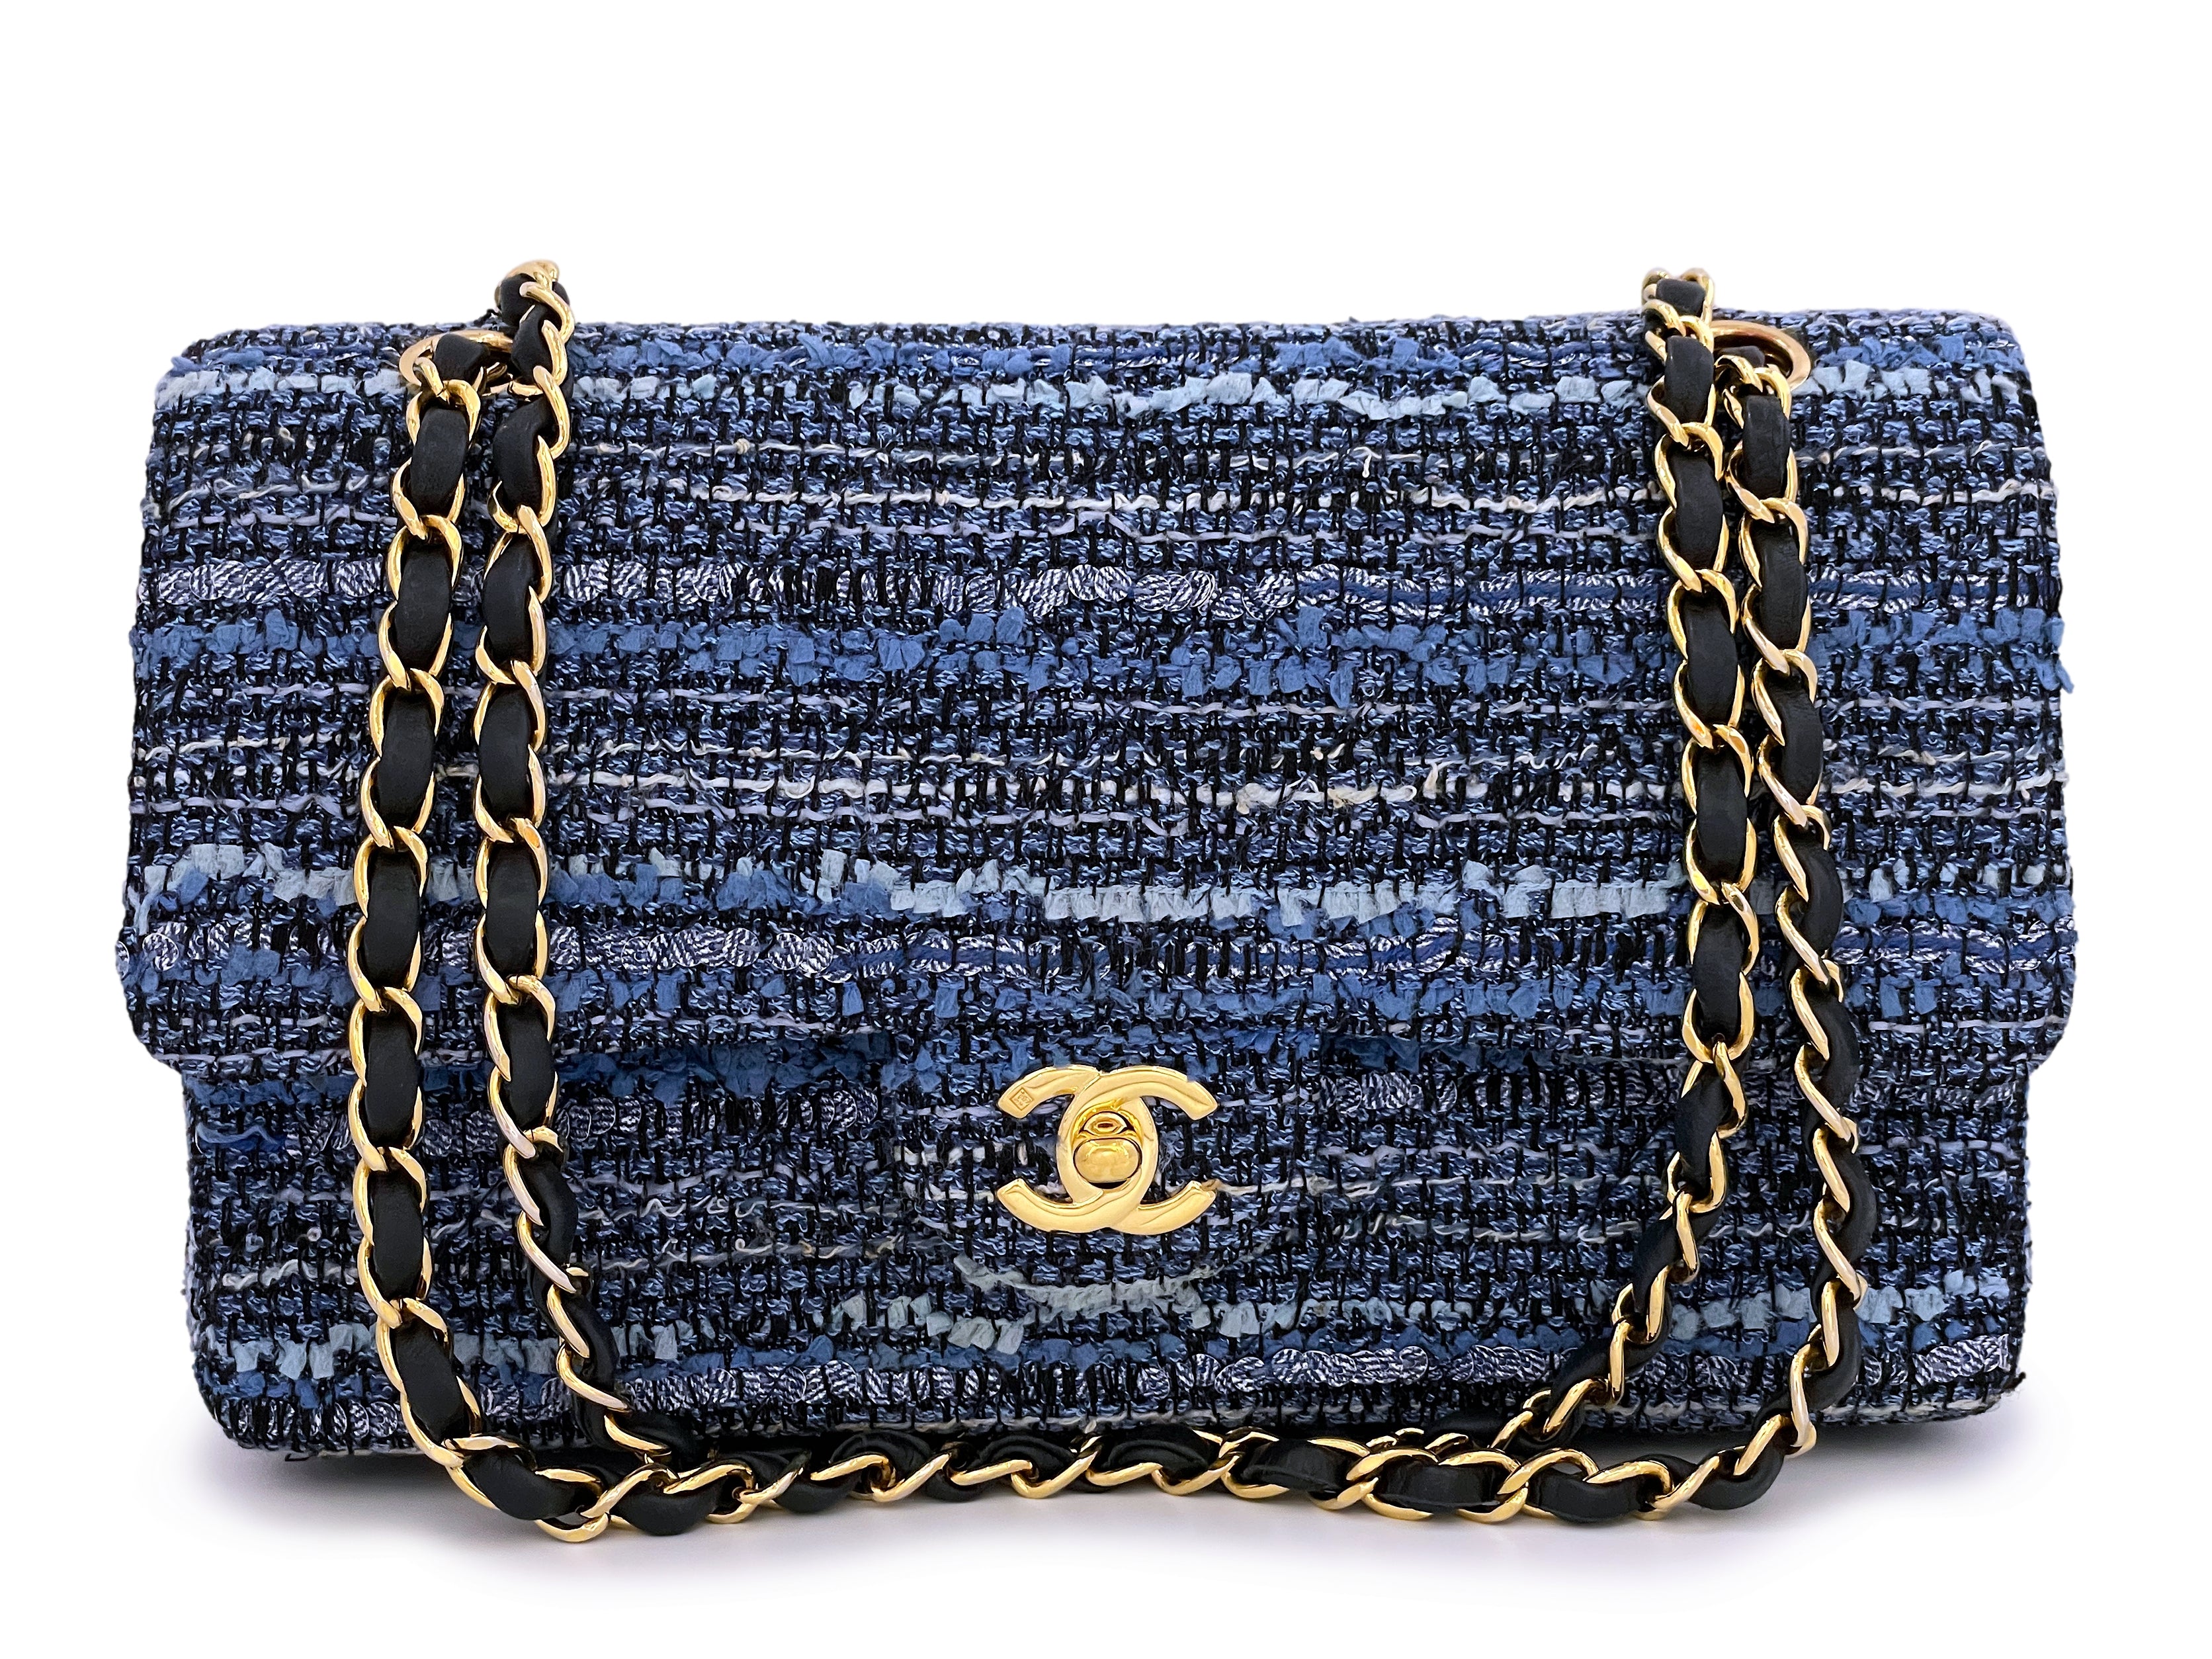 Blue Quilted Tweed 'CC' Classic Flap Bag